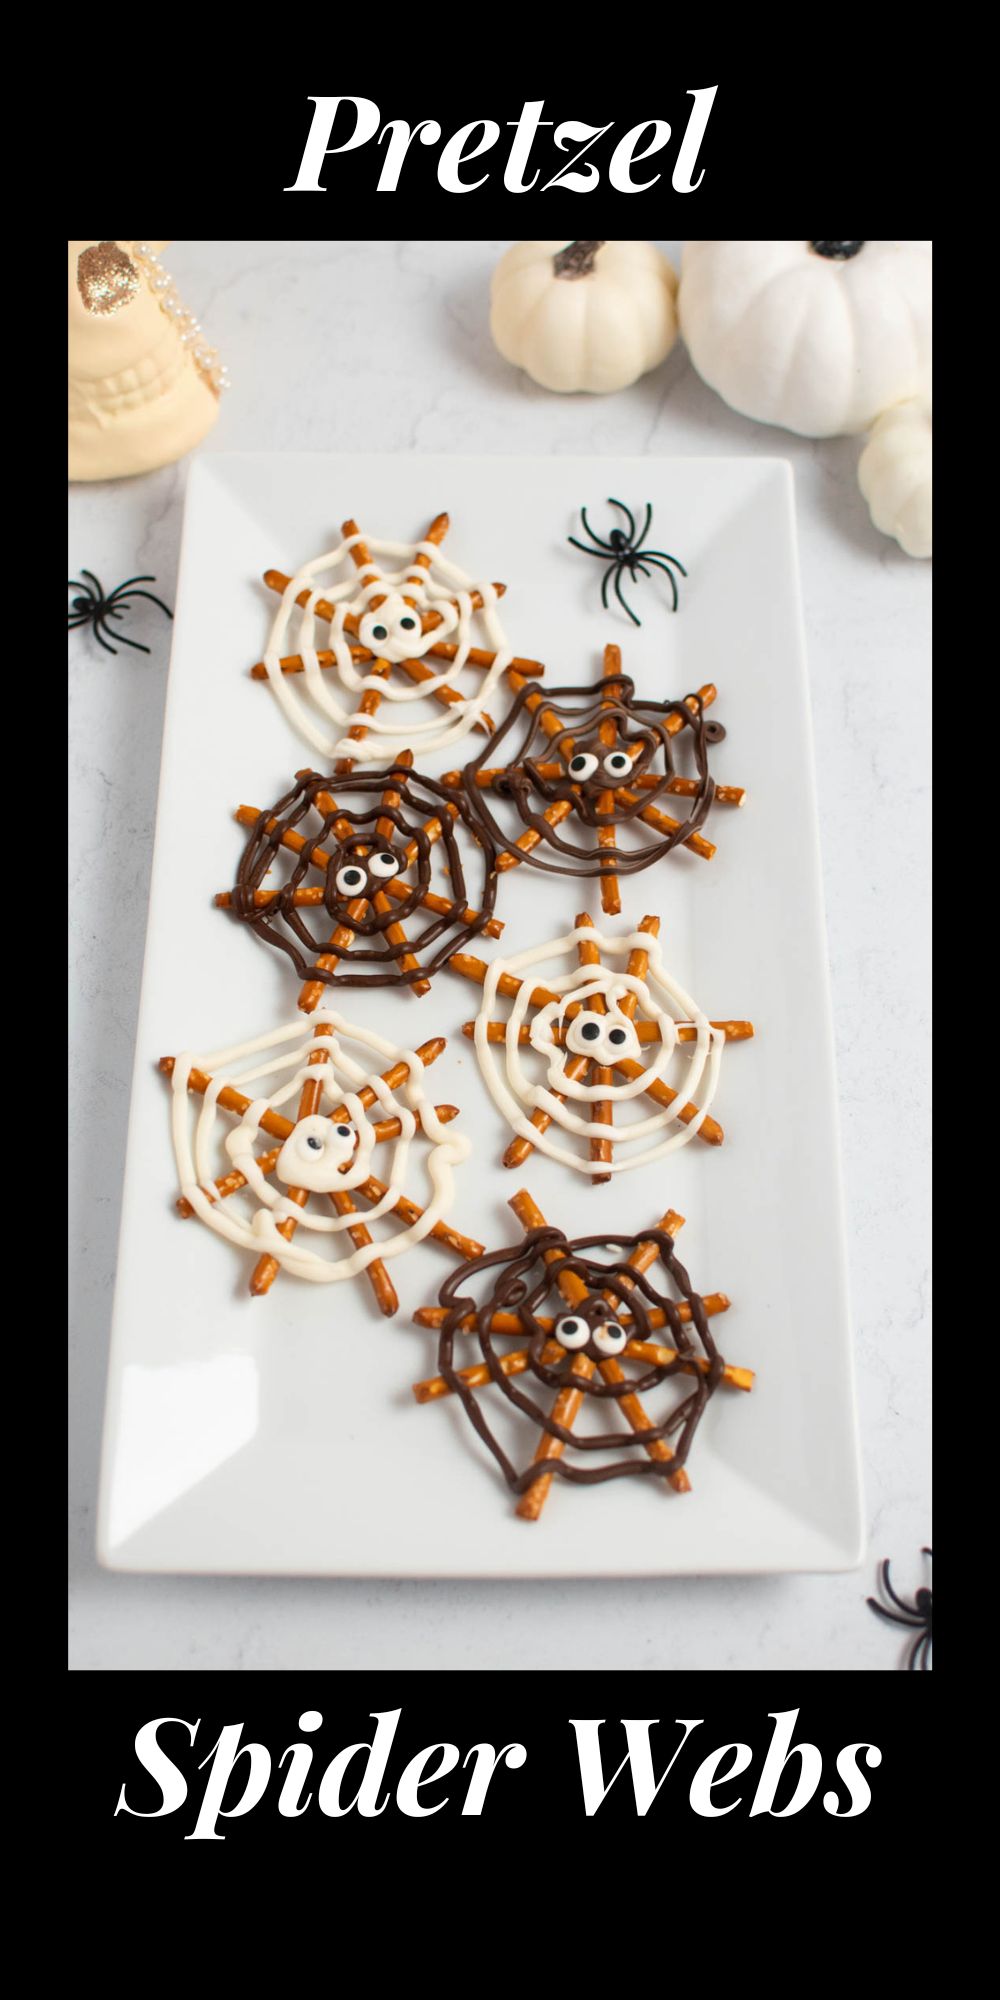 Pinterest graphic with text and photo of pretzel spider webs on white platter.